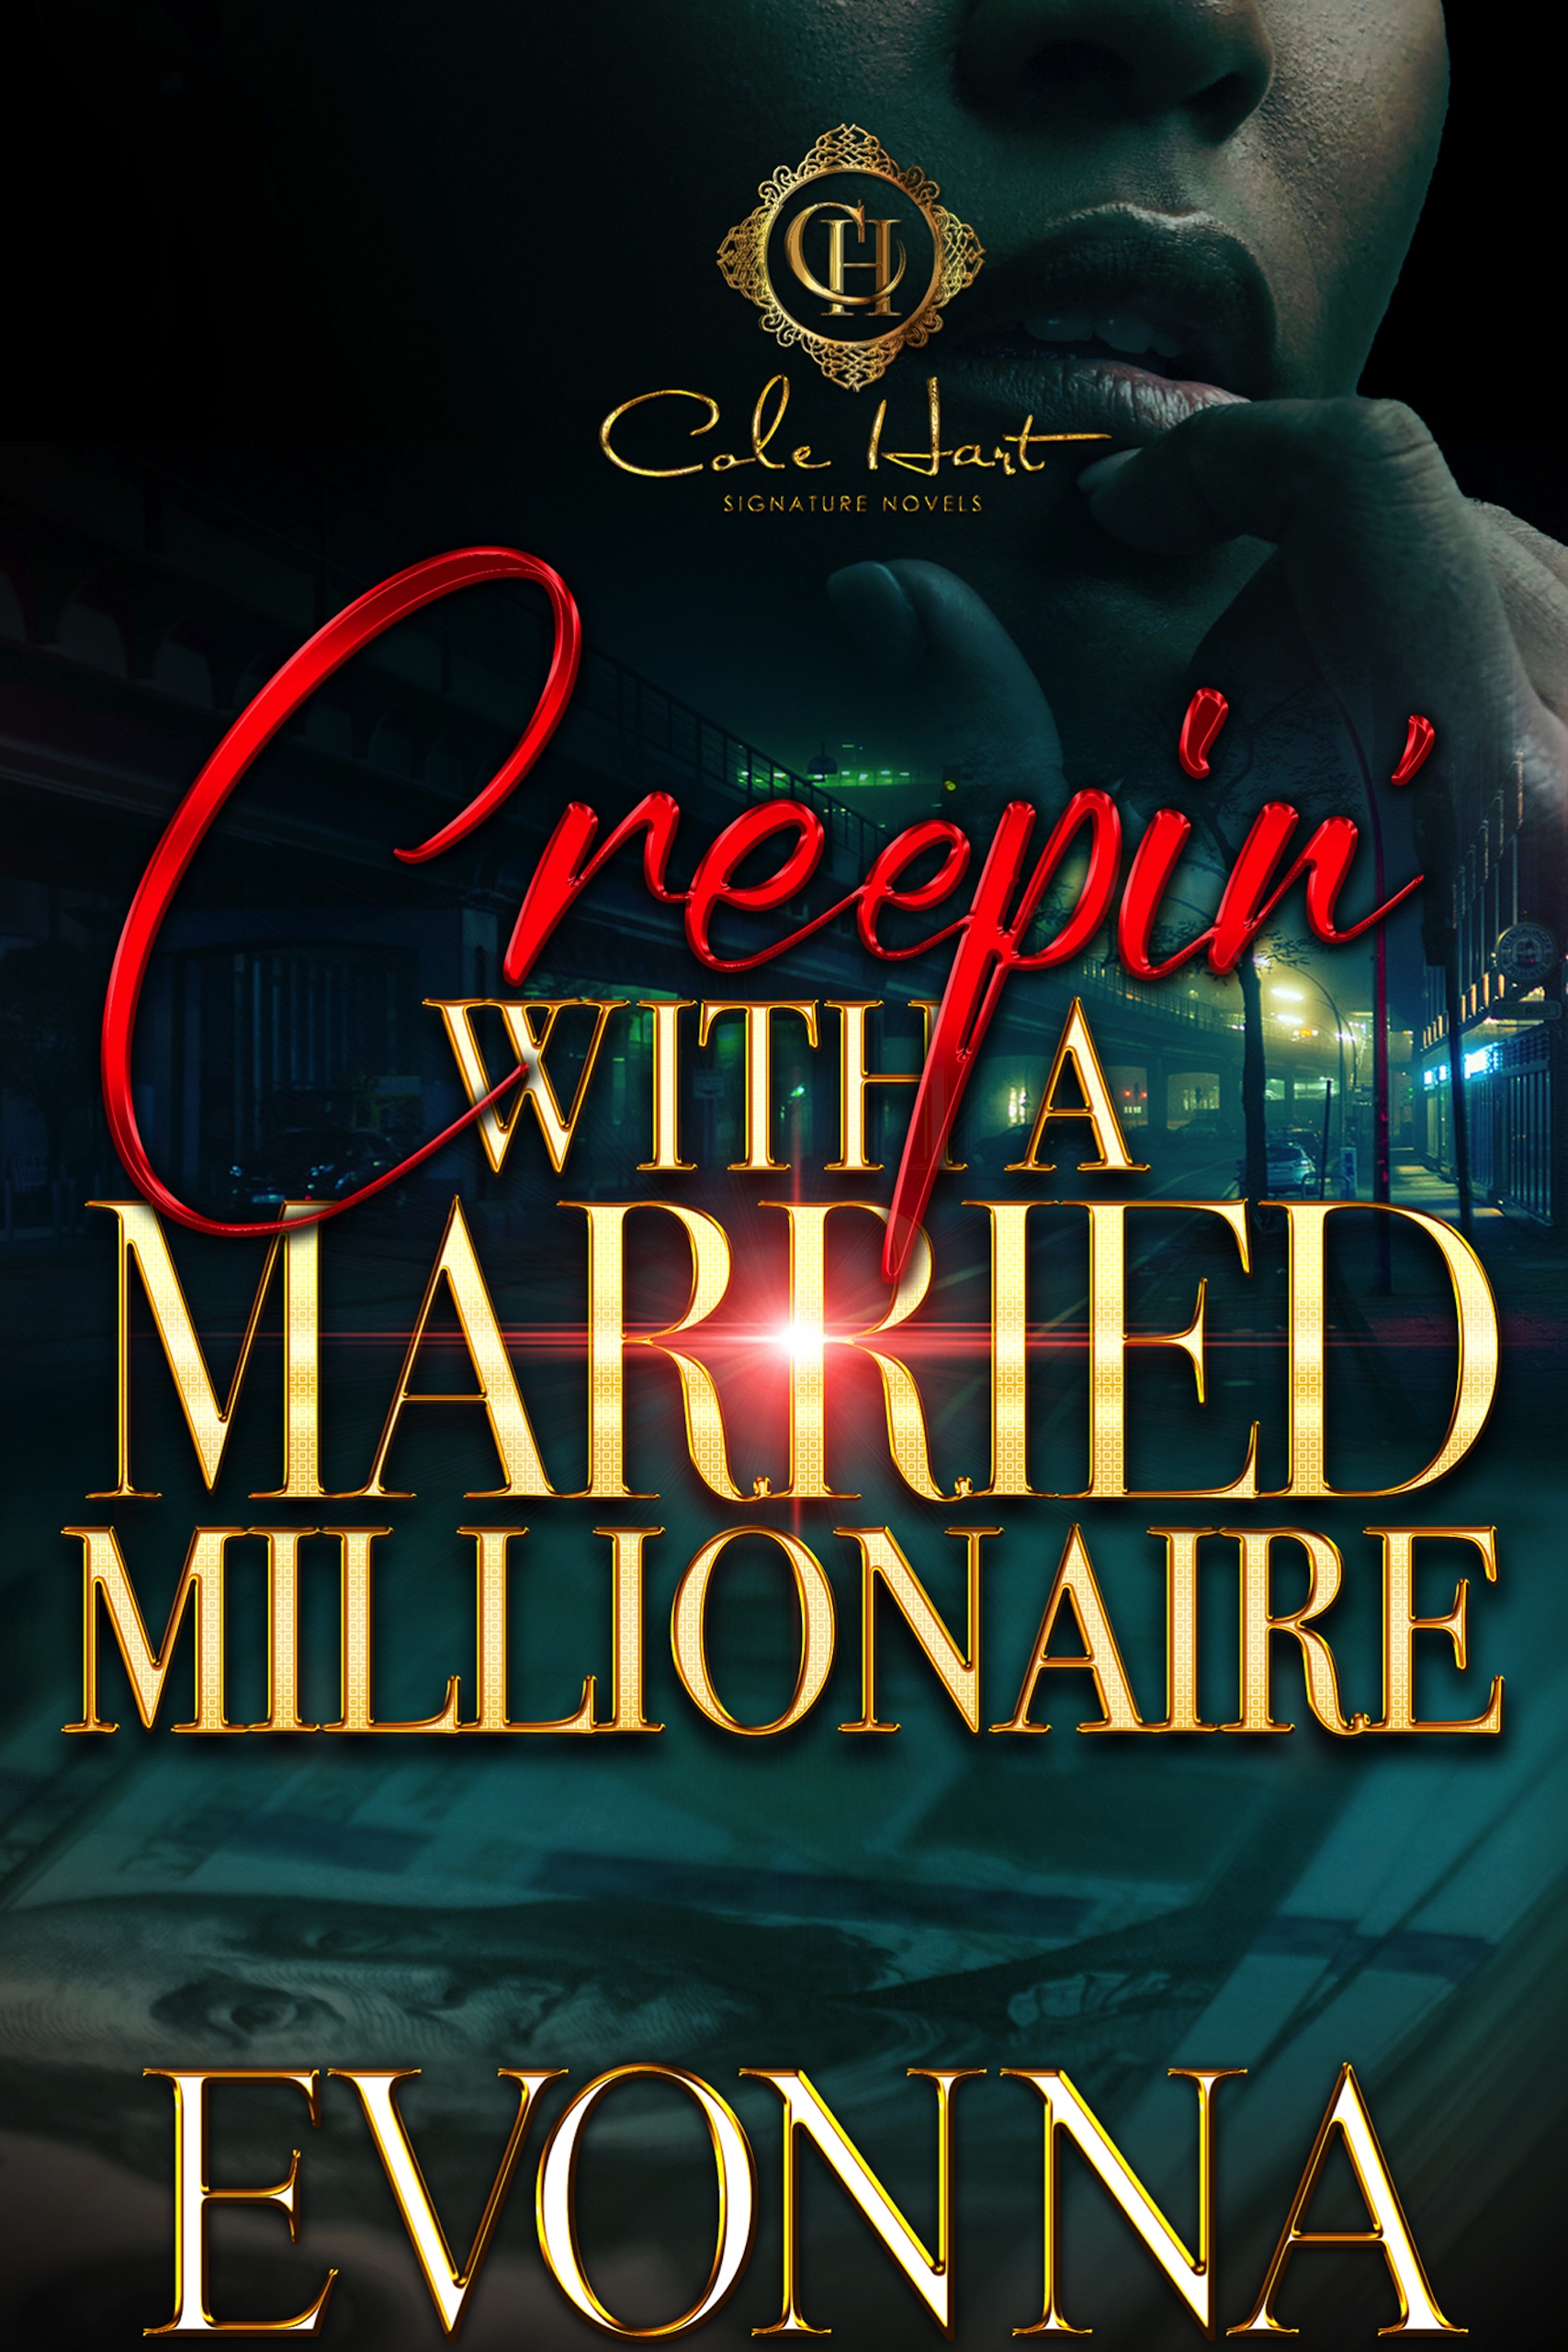 Creepin' With A Married Millionaire